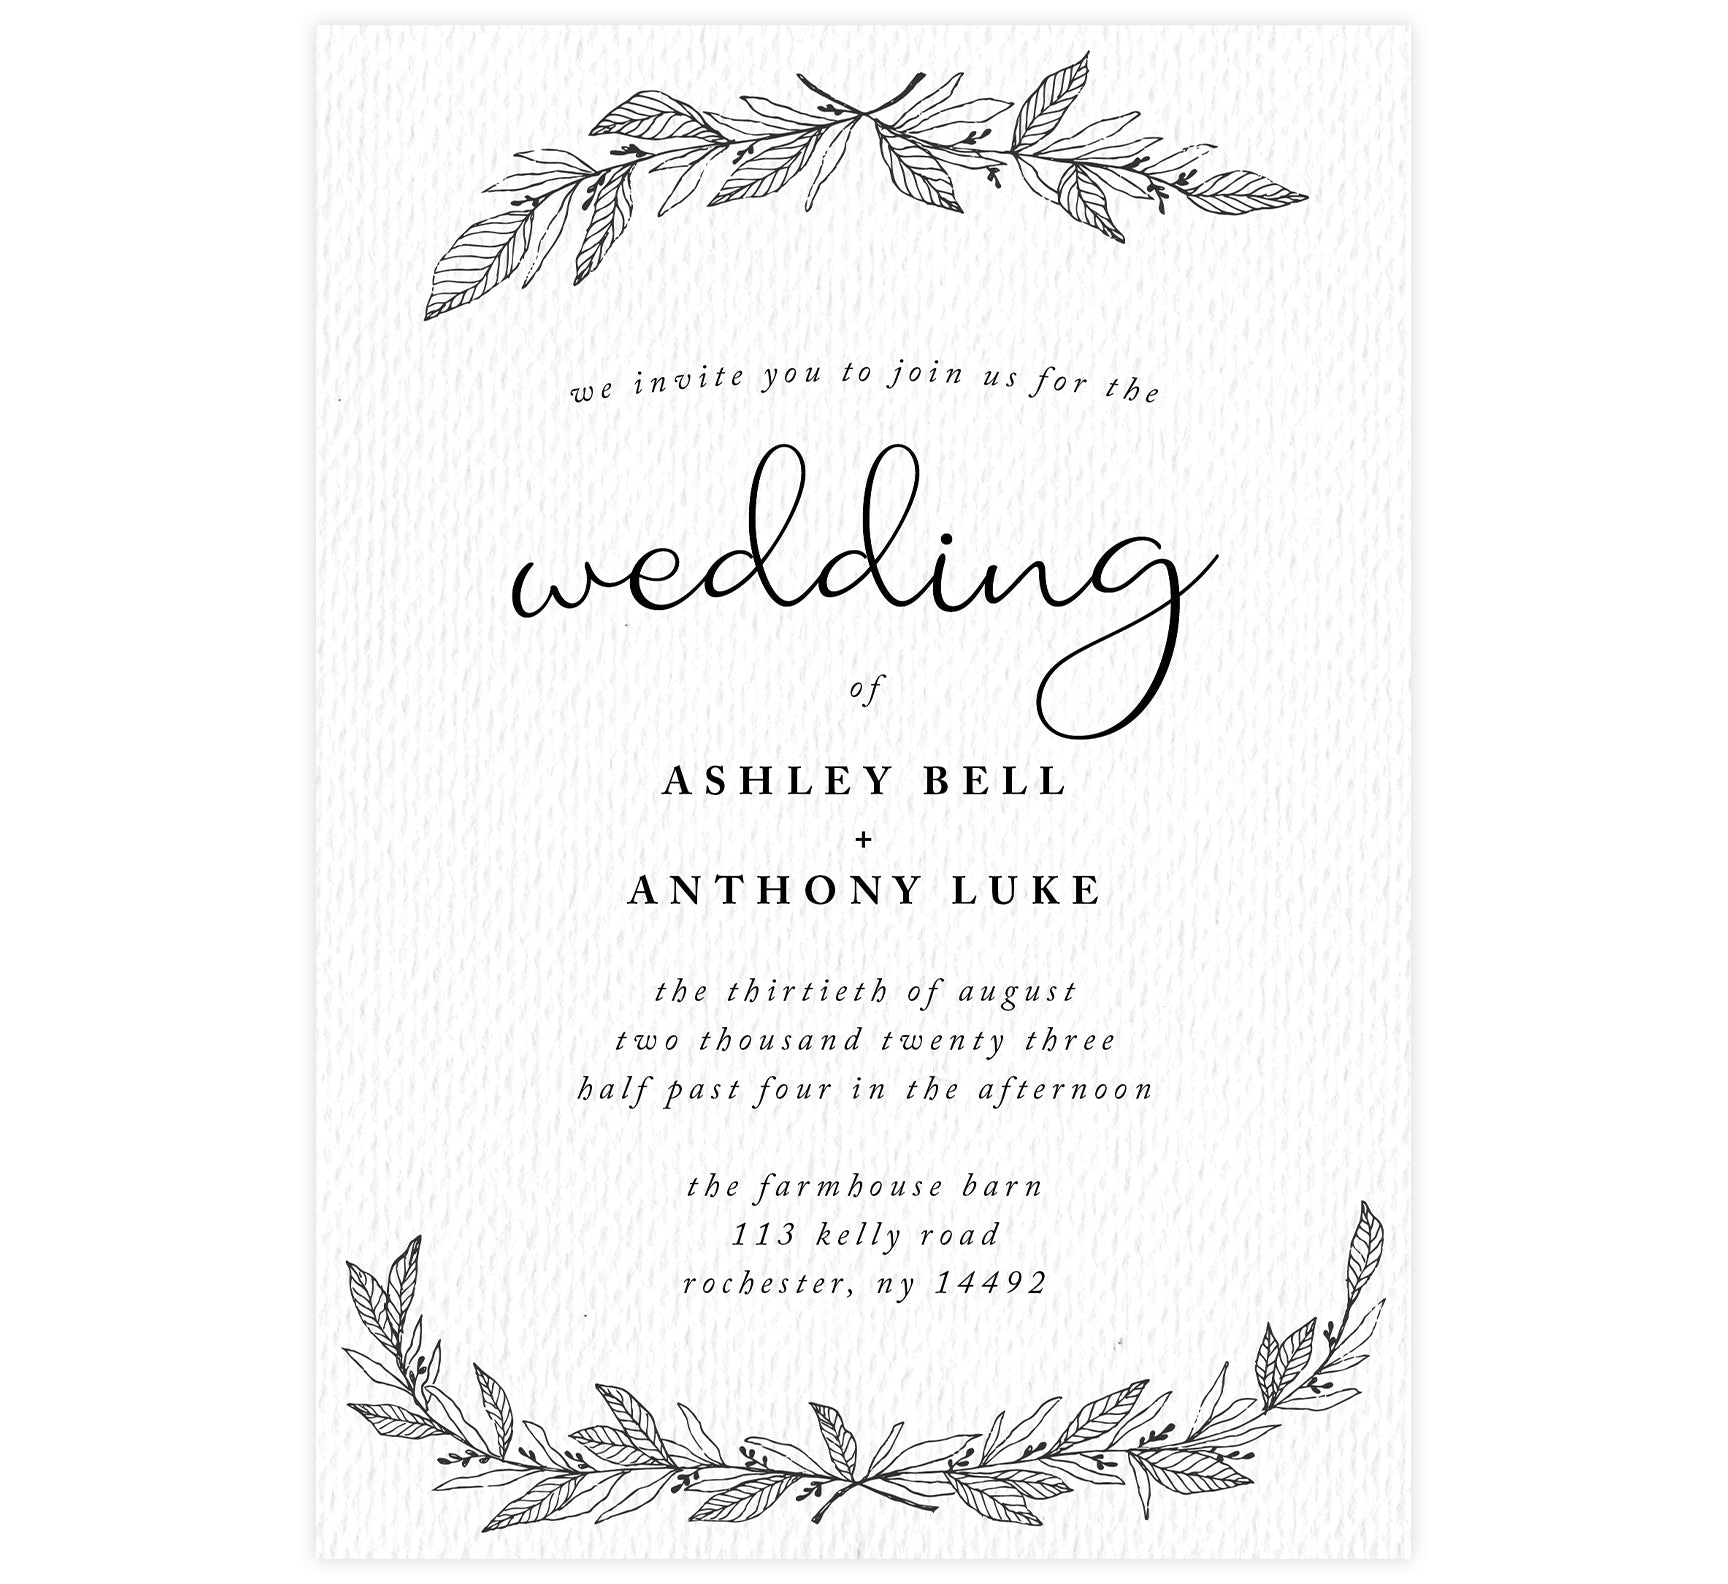 Hand Drawn Ceremony wedding invitation; textured white background with hand drawn leaves at the top and bottom and black text